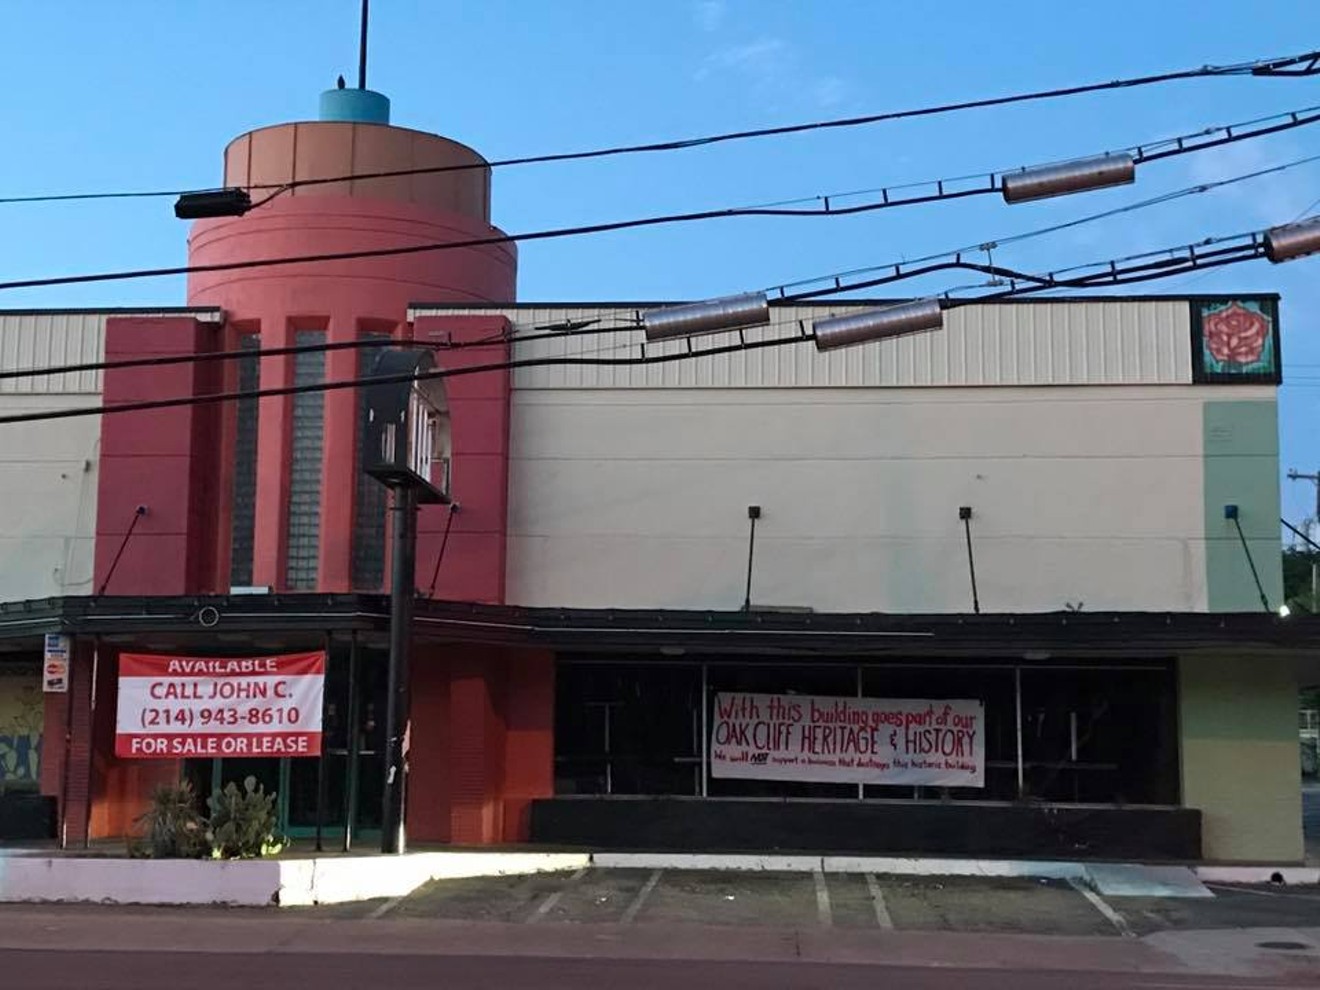 This morning, Oak Cliff resident Victoria Ferrell-Ortiz went to El Corazon's empty building and posted this sign "as a last ditch effort to save it from being demolished," she says. Hours later, it was quickly demolished by the developer that will soon build a CVS in its place.